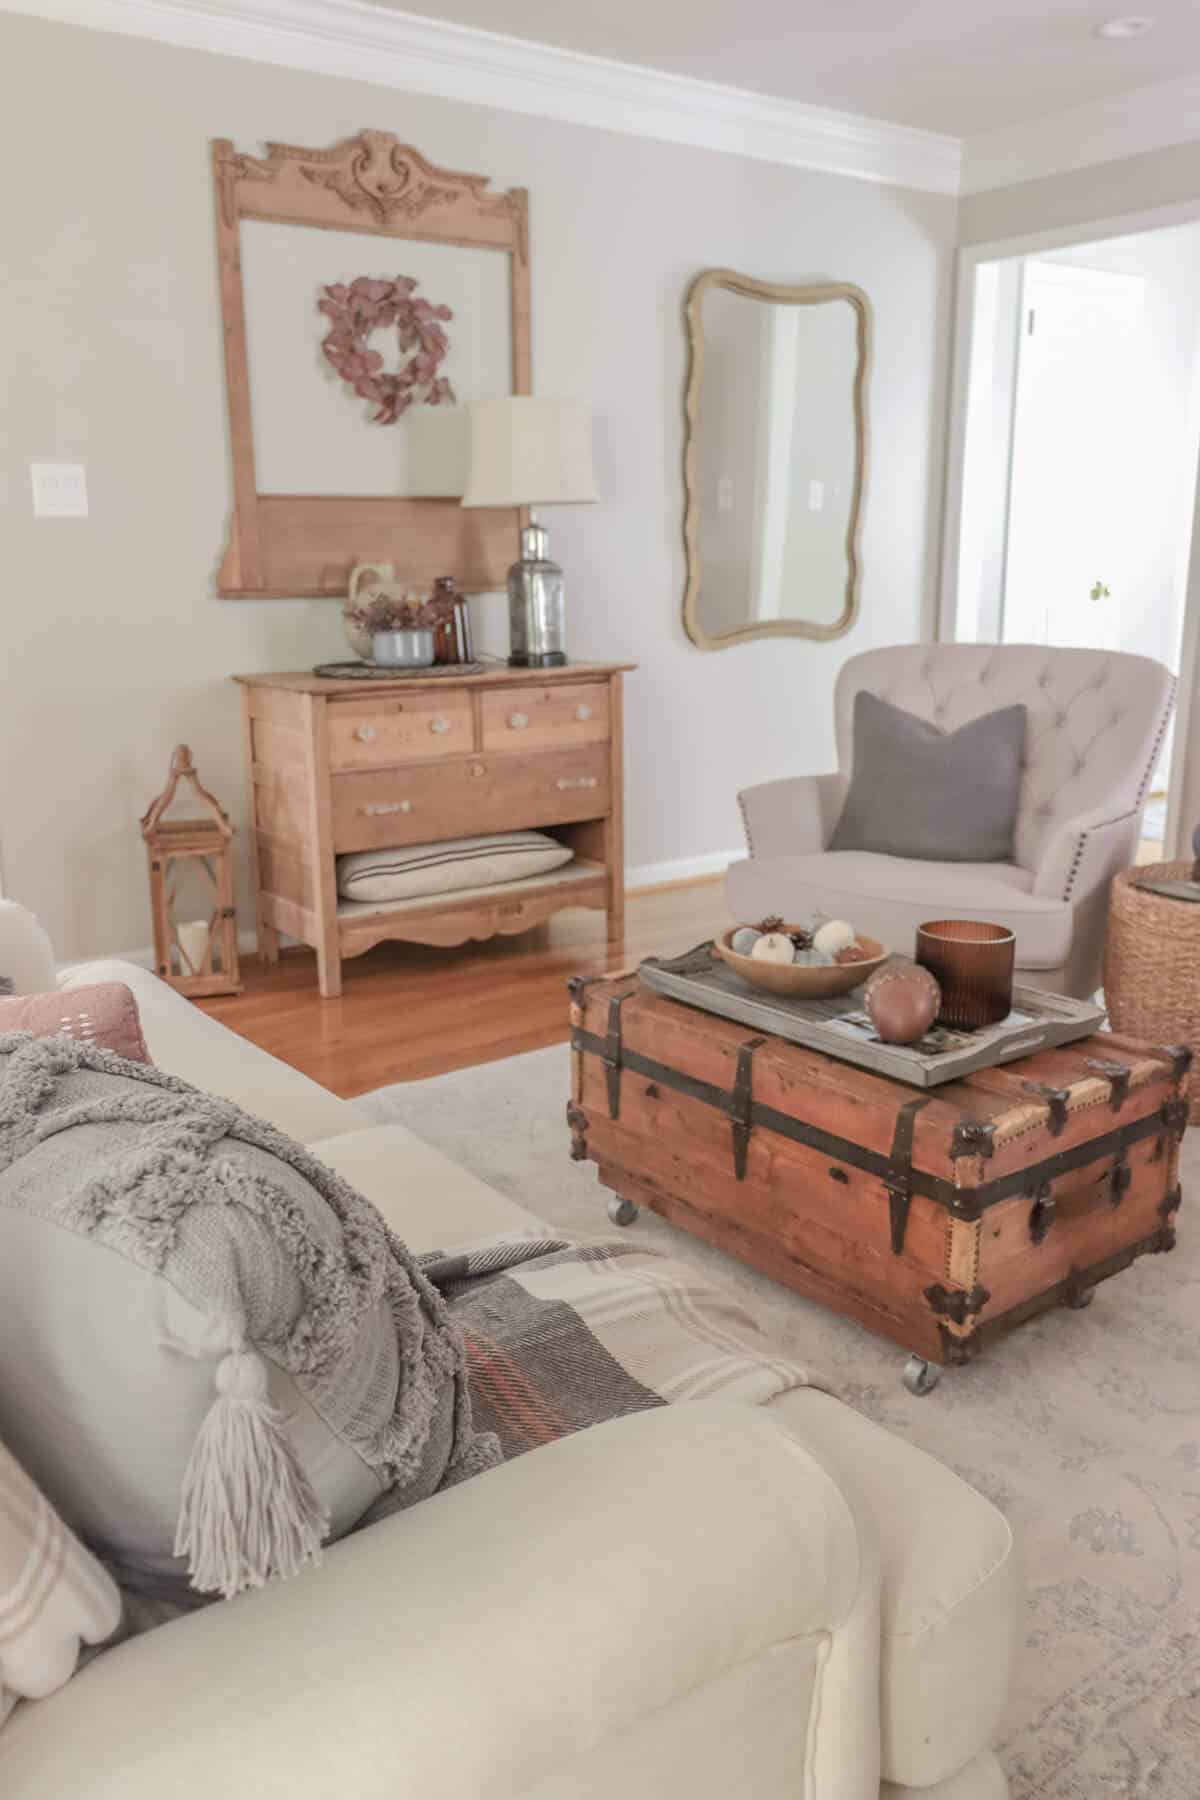 armchair with gray pillows with vintage wooden crate as a coffee table decorated for fall with gray fall decor